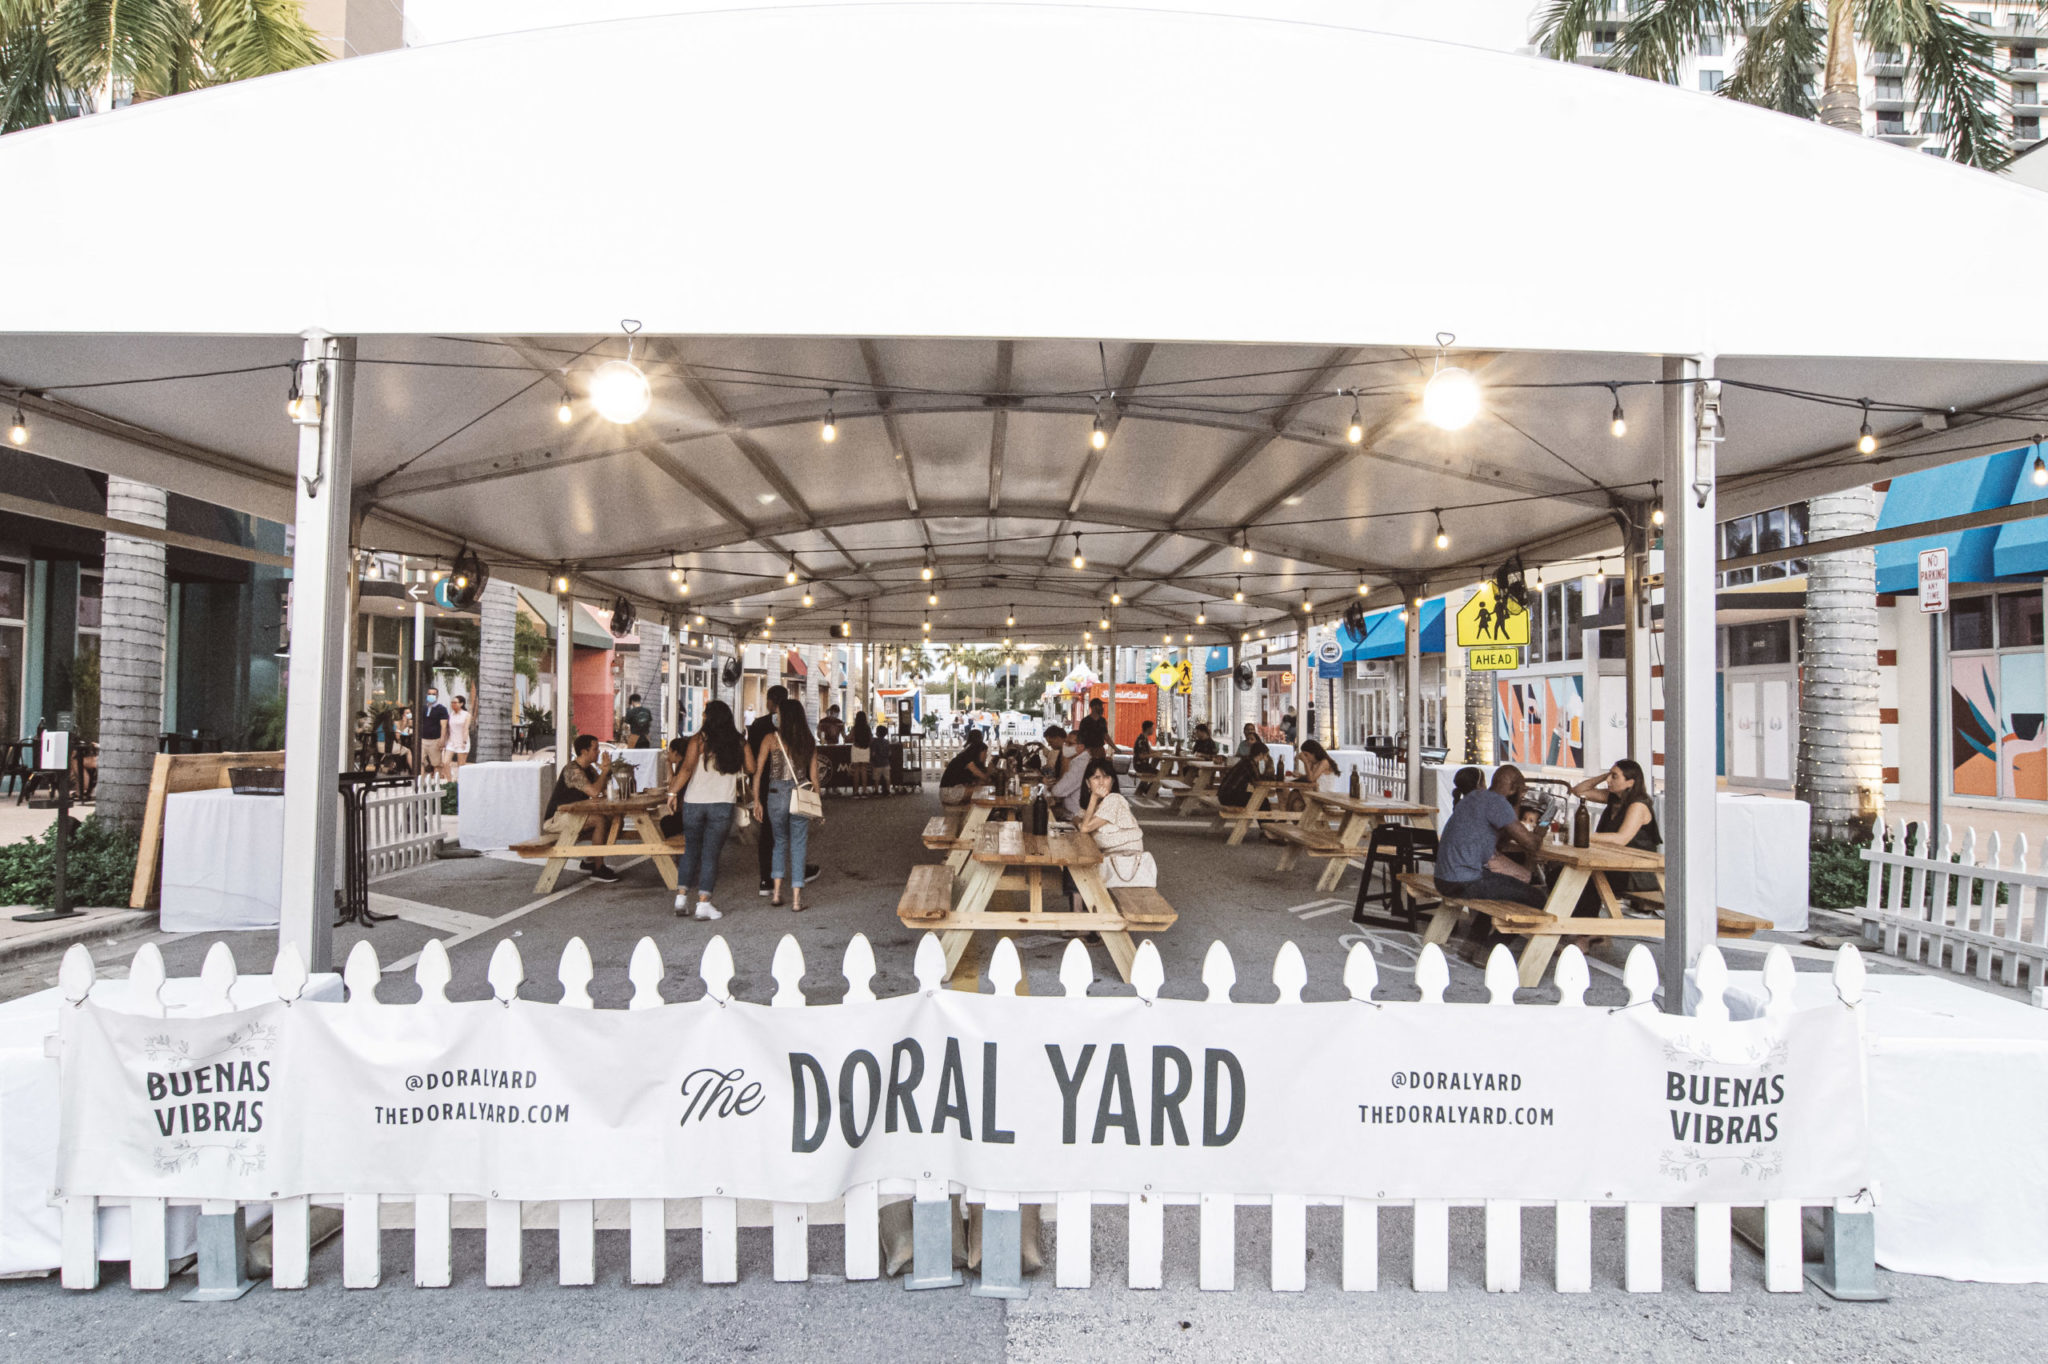 The Doral Yard tent on Main Street by Rod Deal